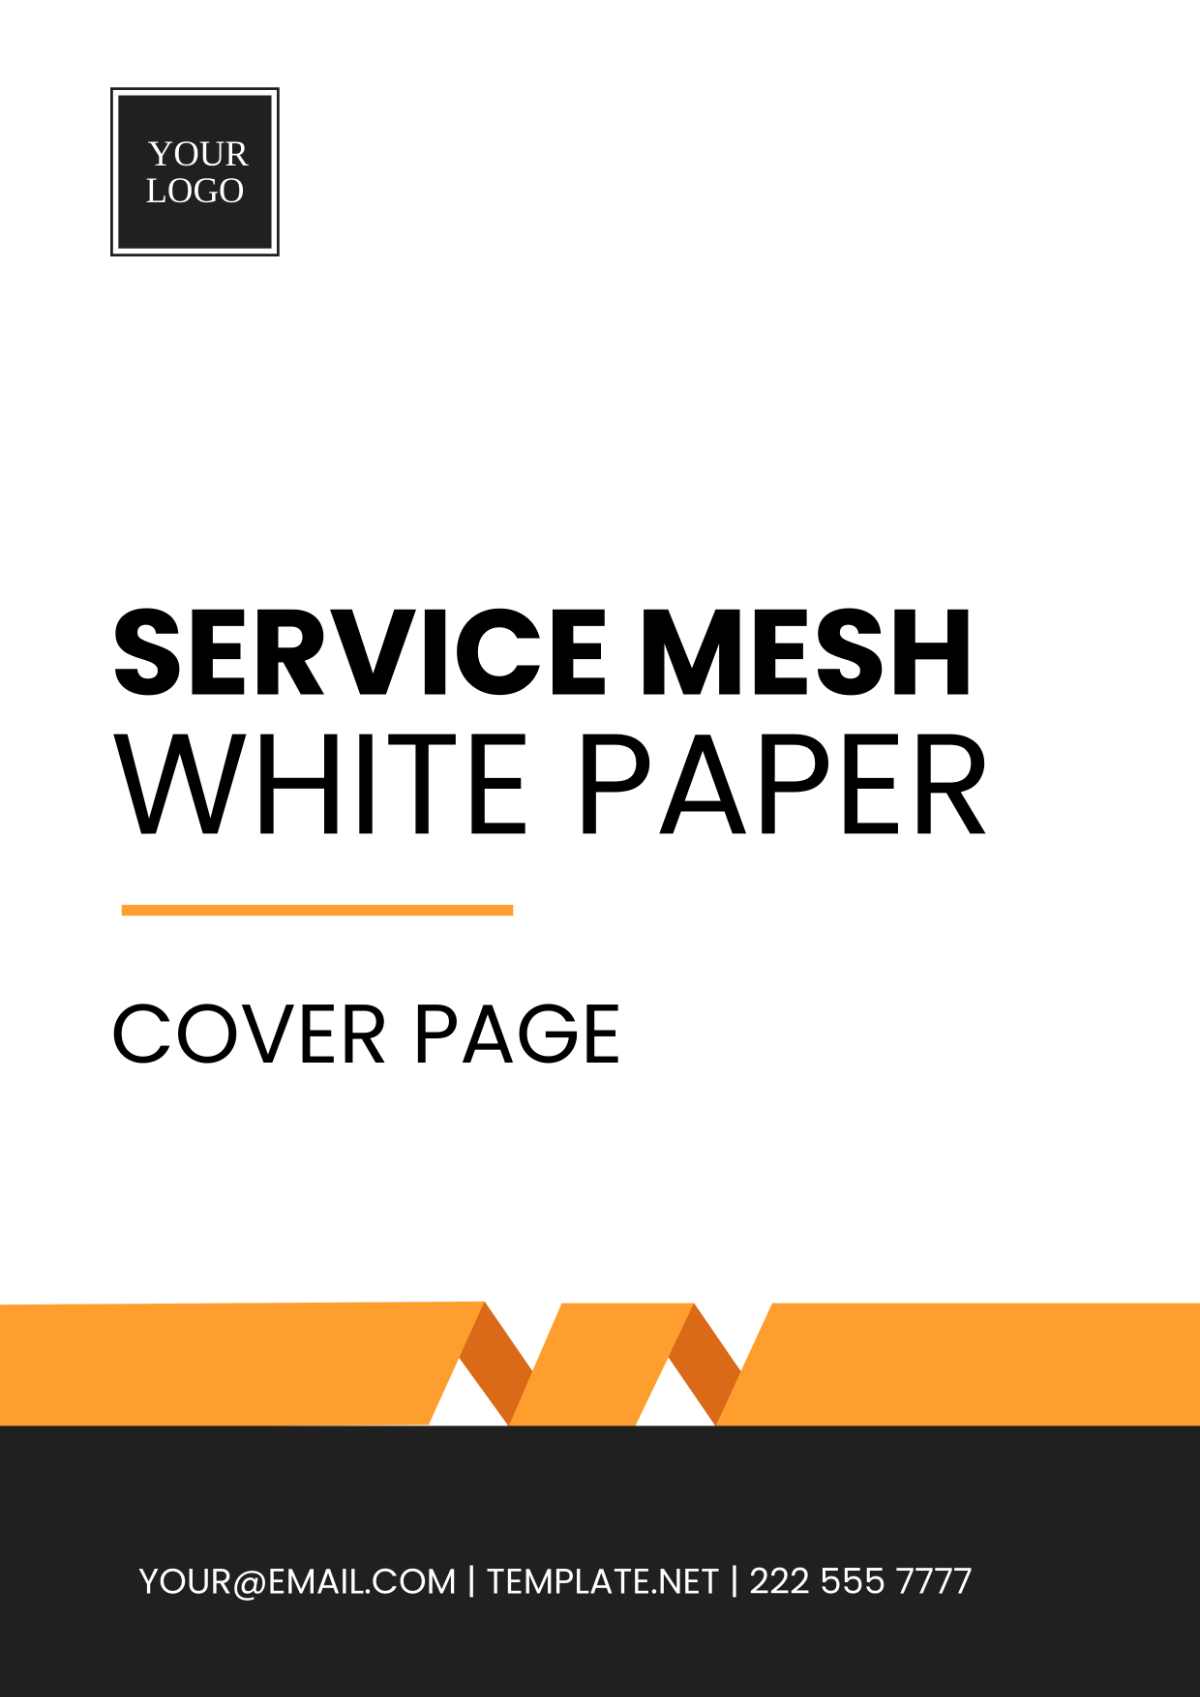 Service Mesh White Paper Cover Page Template